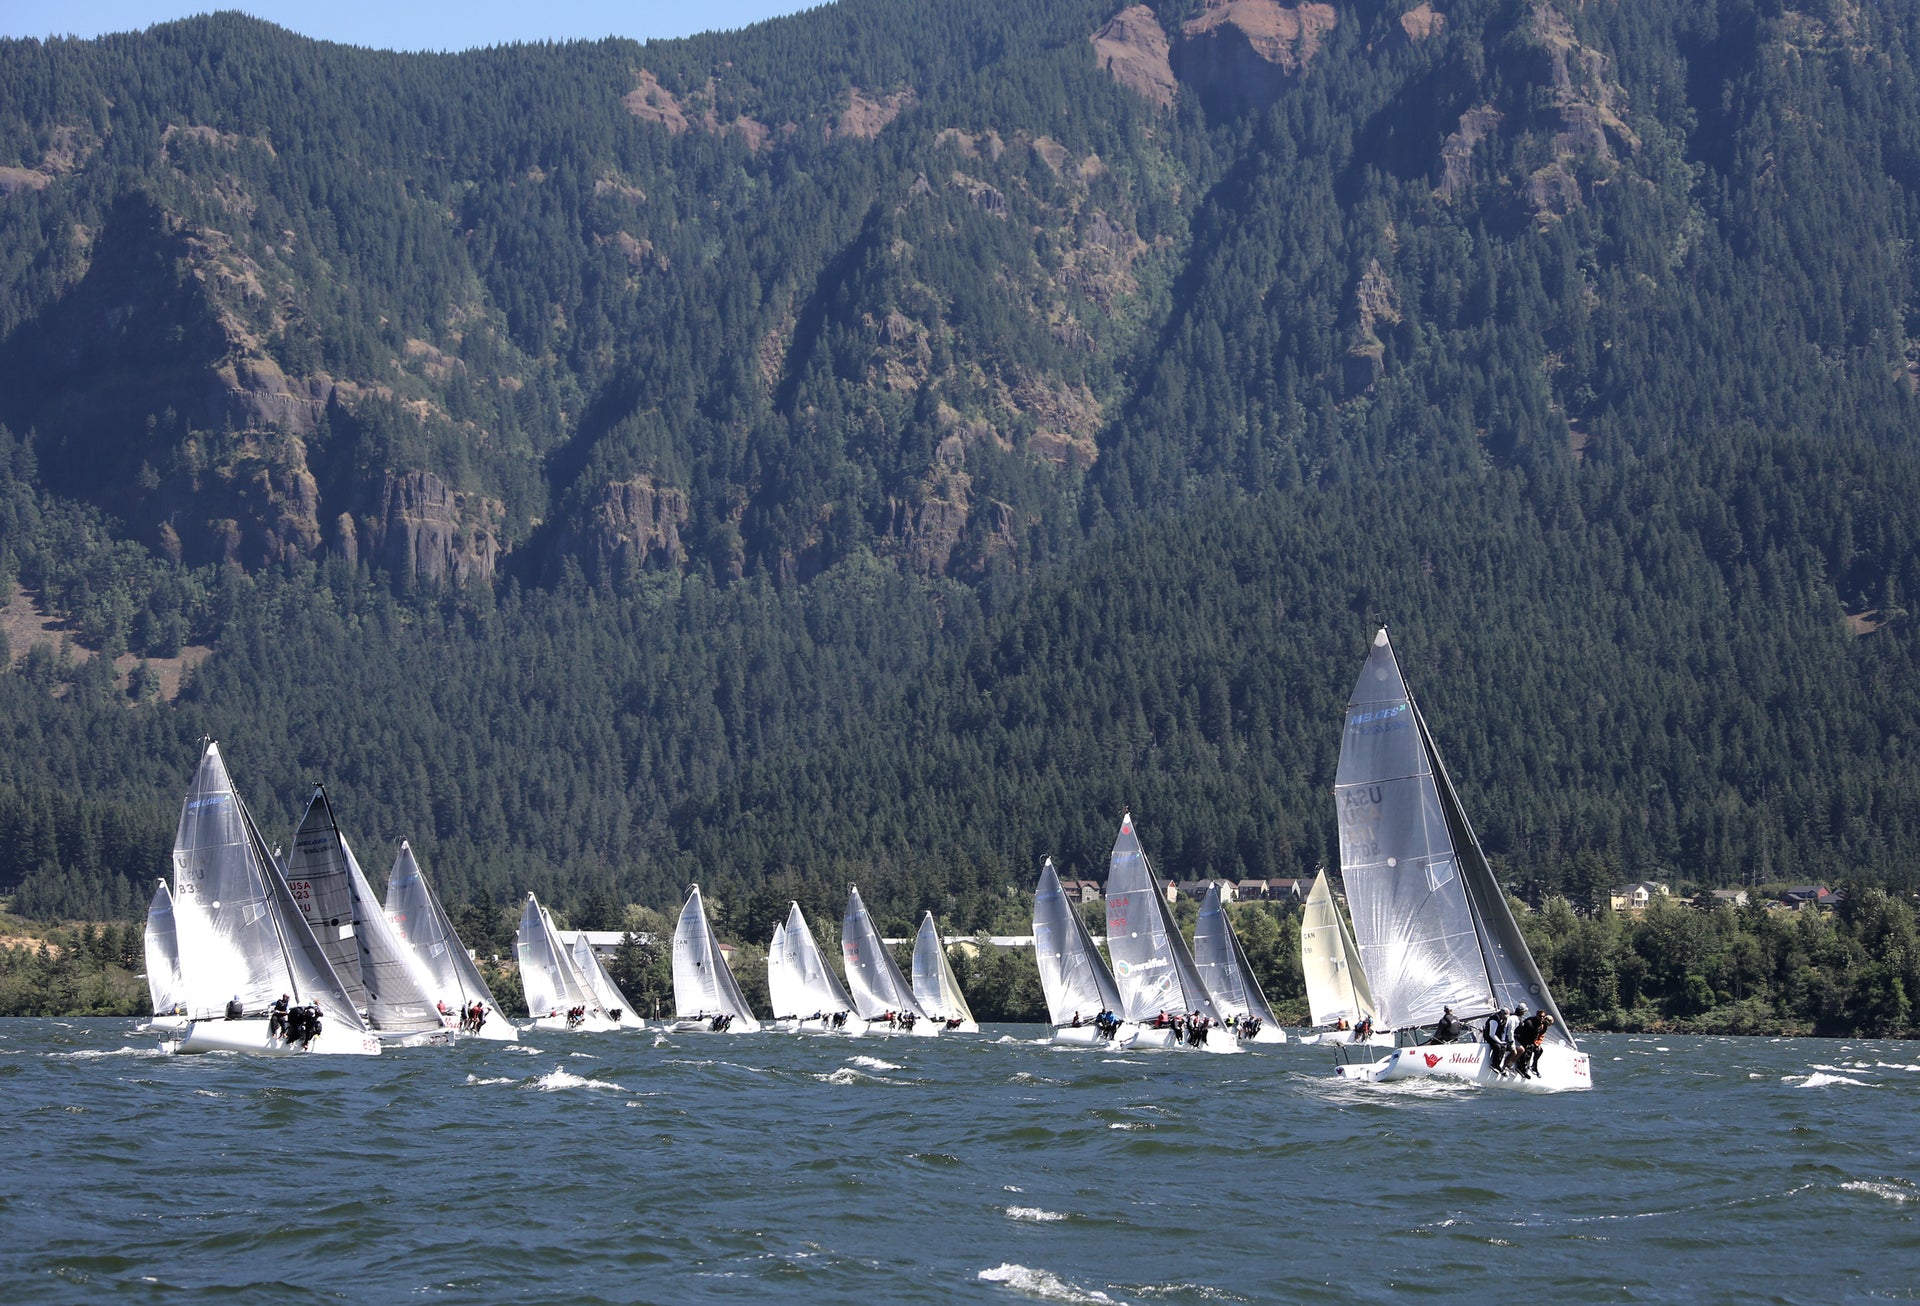 MELGES 24 SAILORS REAP THE WIND AT THE COLUMBIA RIVER GORGE